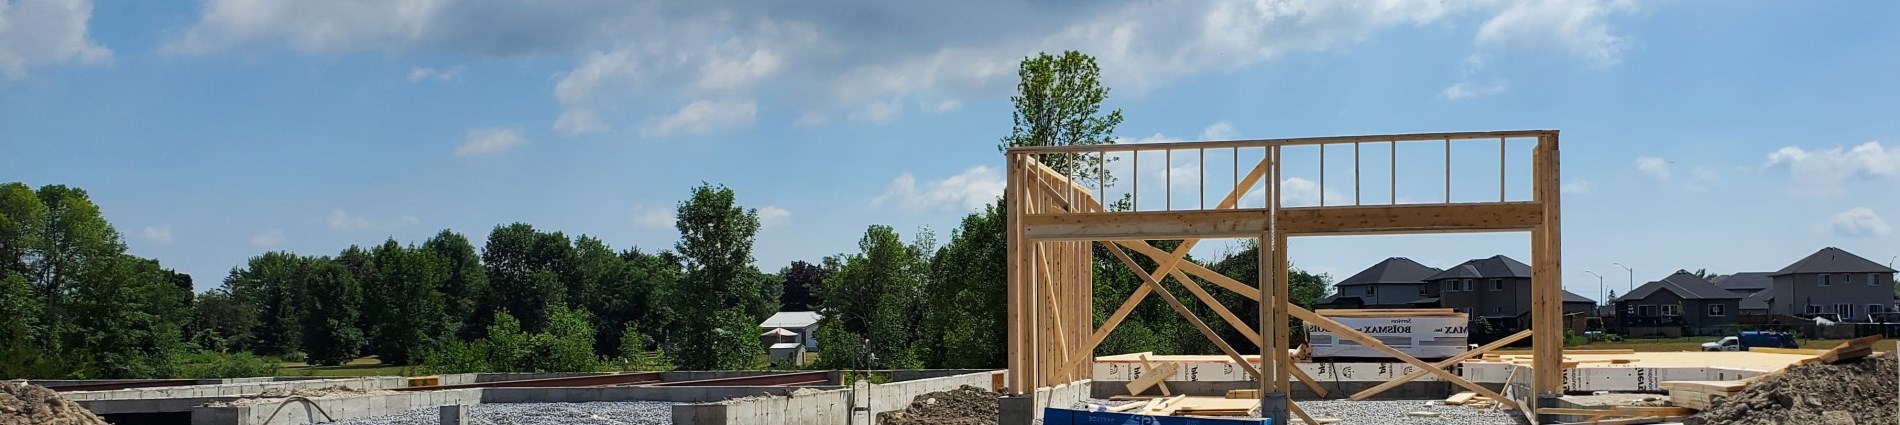 Landscape photo of subdivision and house frame